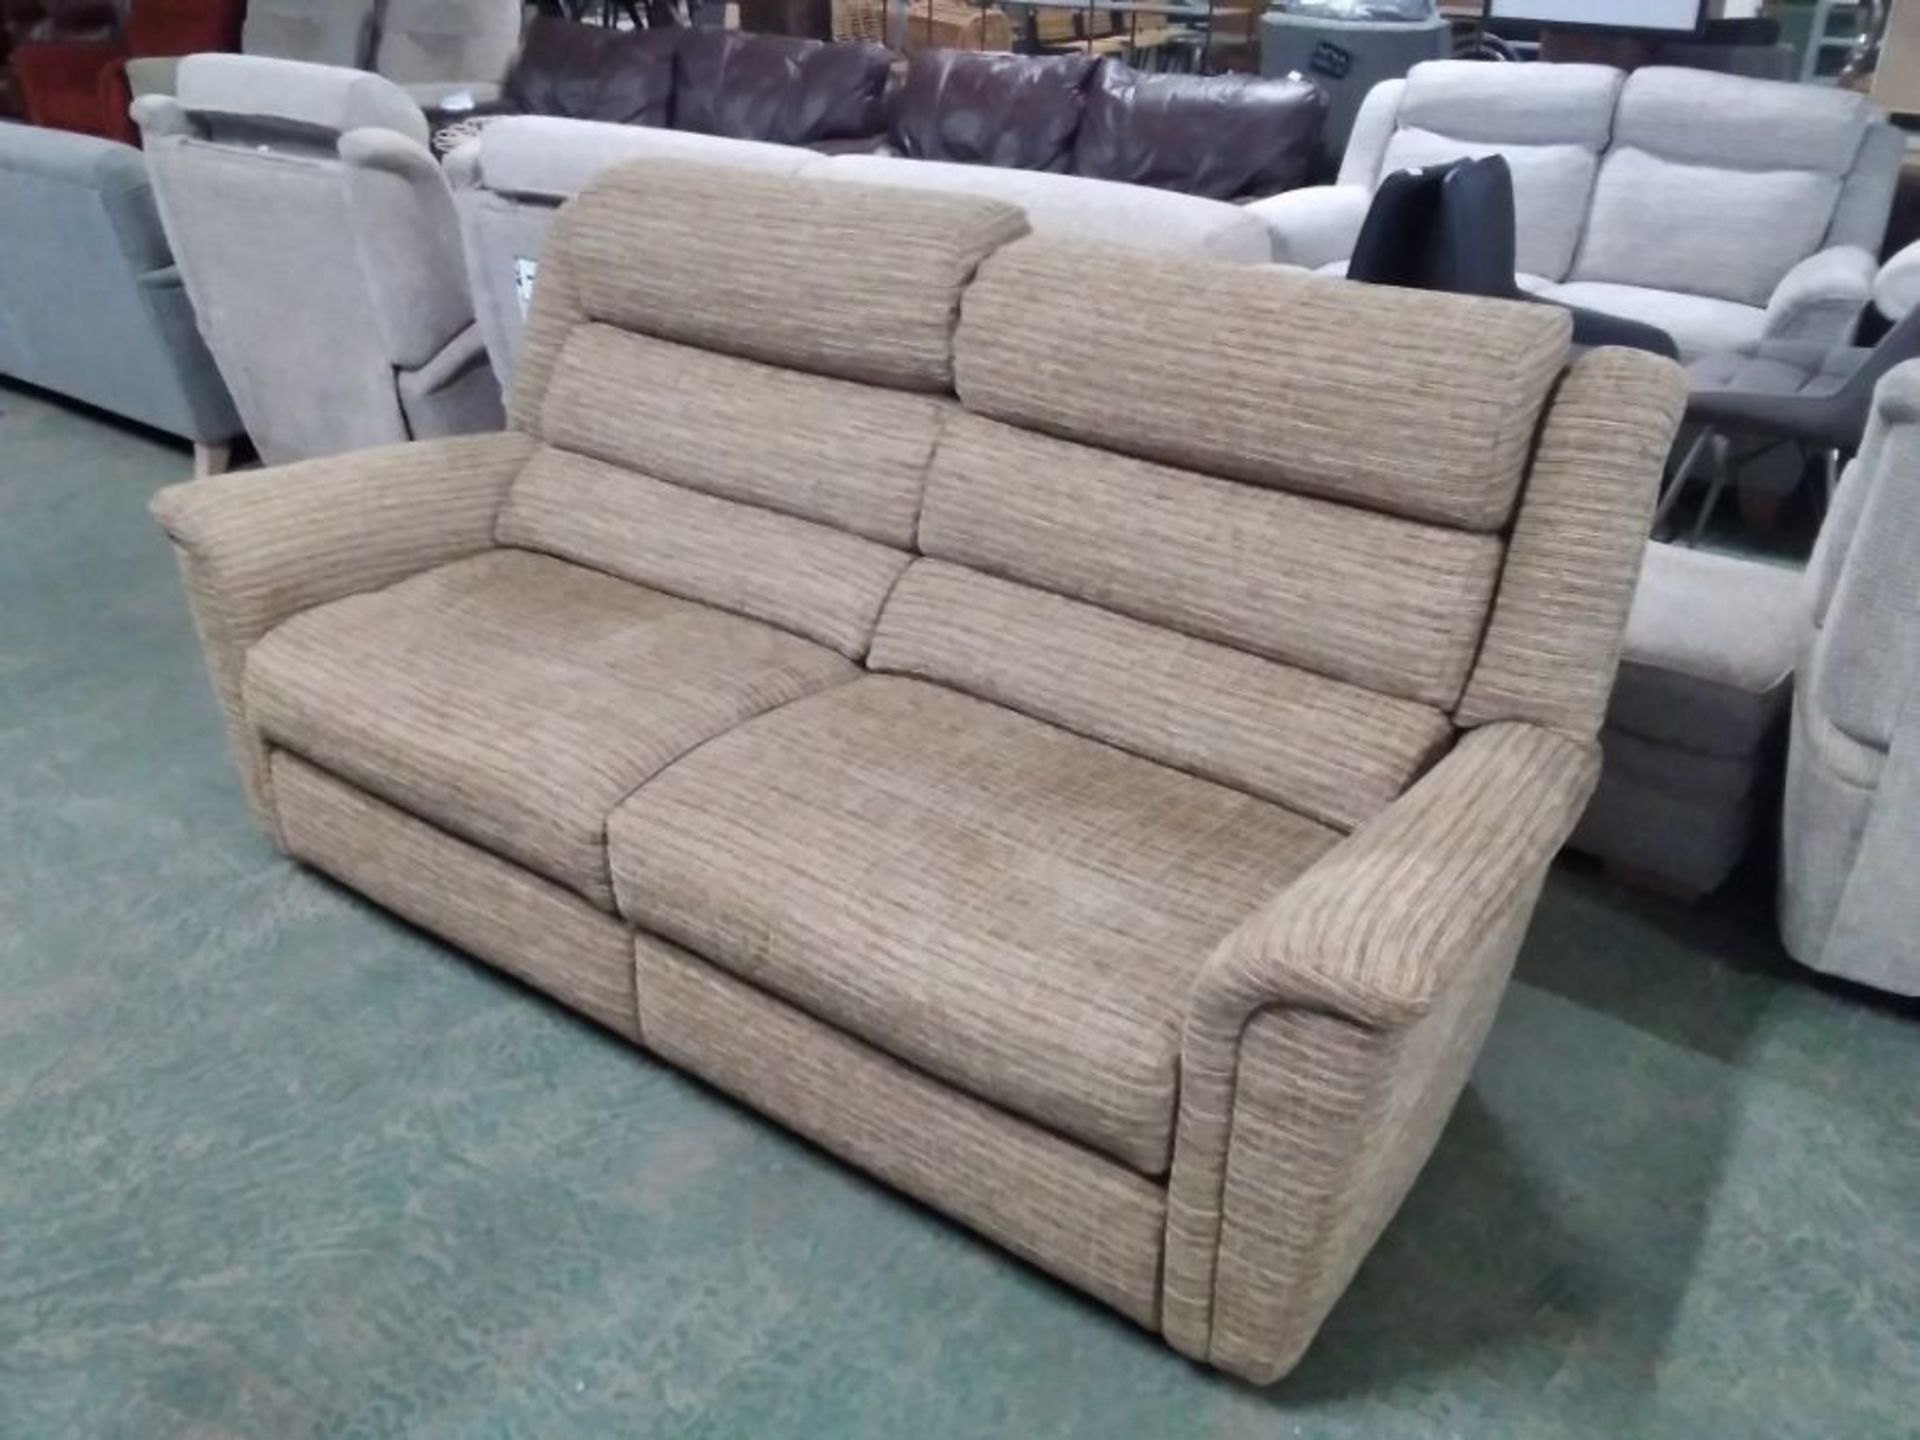 BISCUIT PATTERNED HIGH BACK 3 SEATER SOFA (TROO280